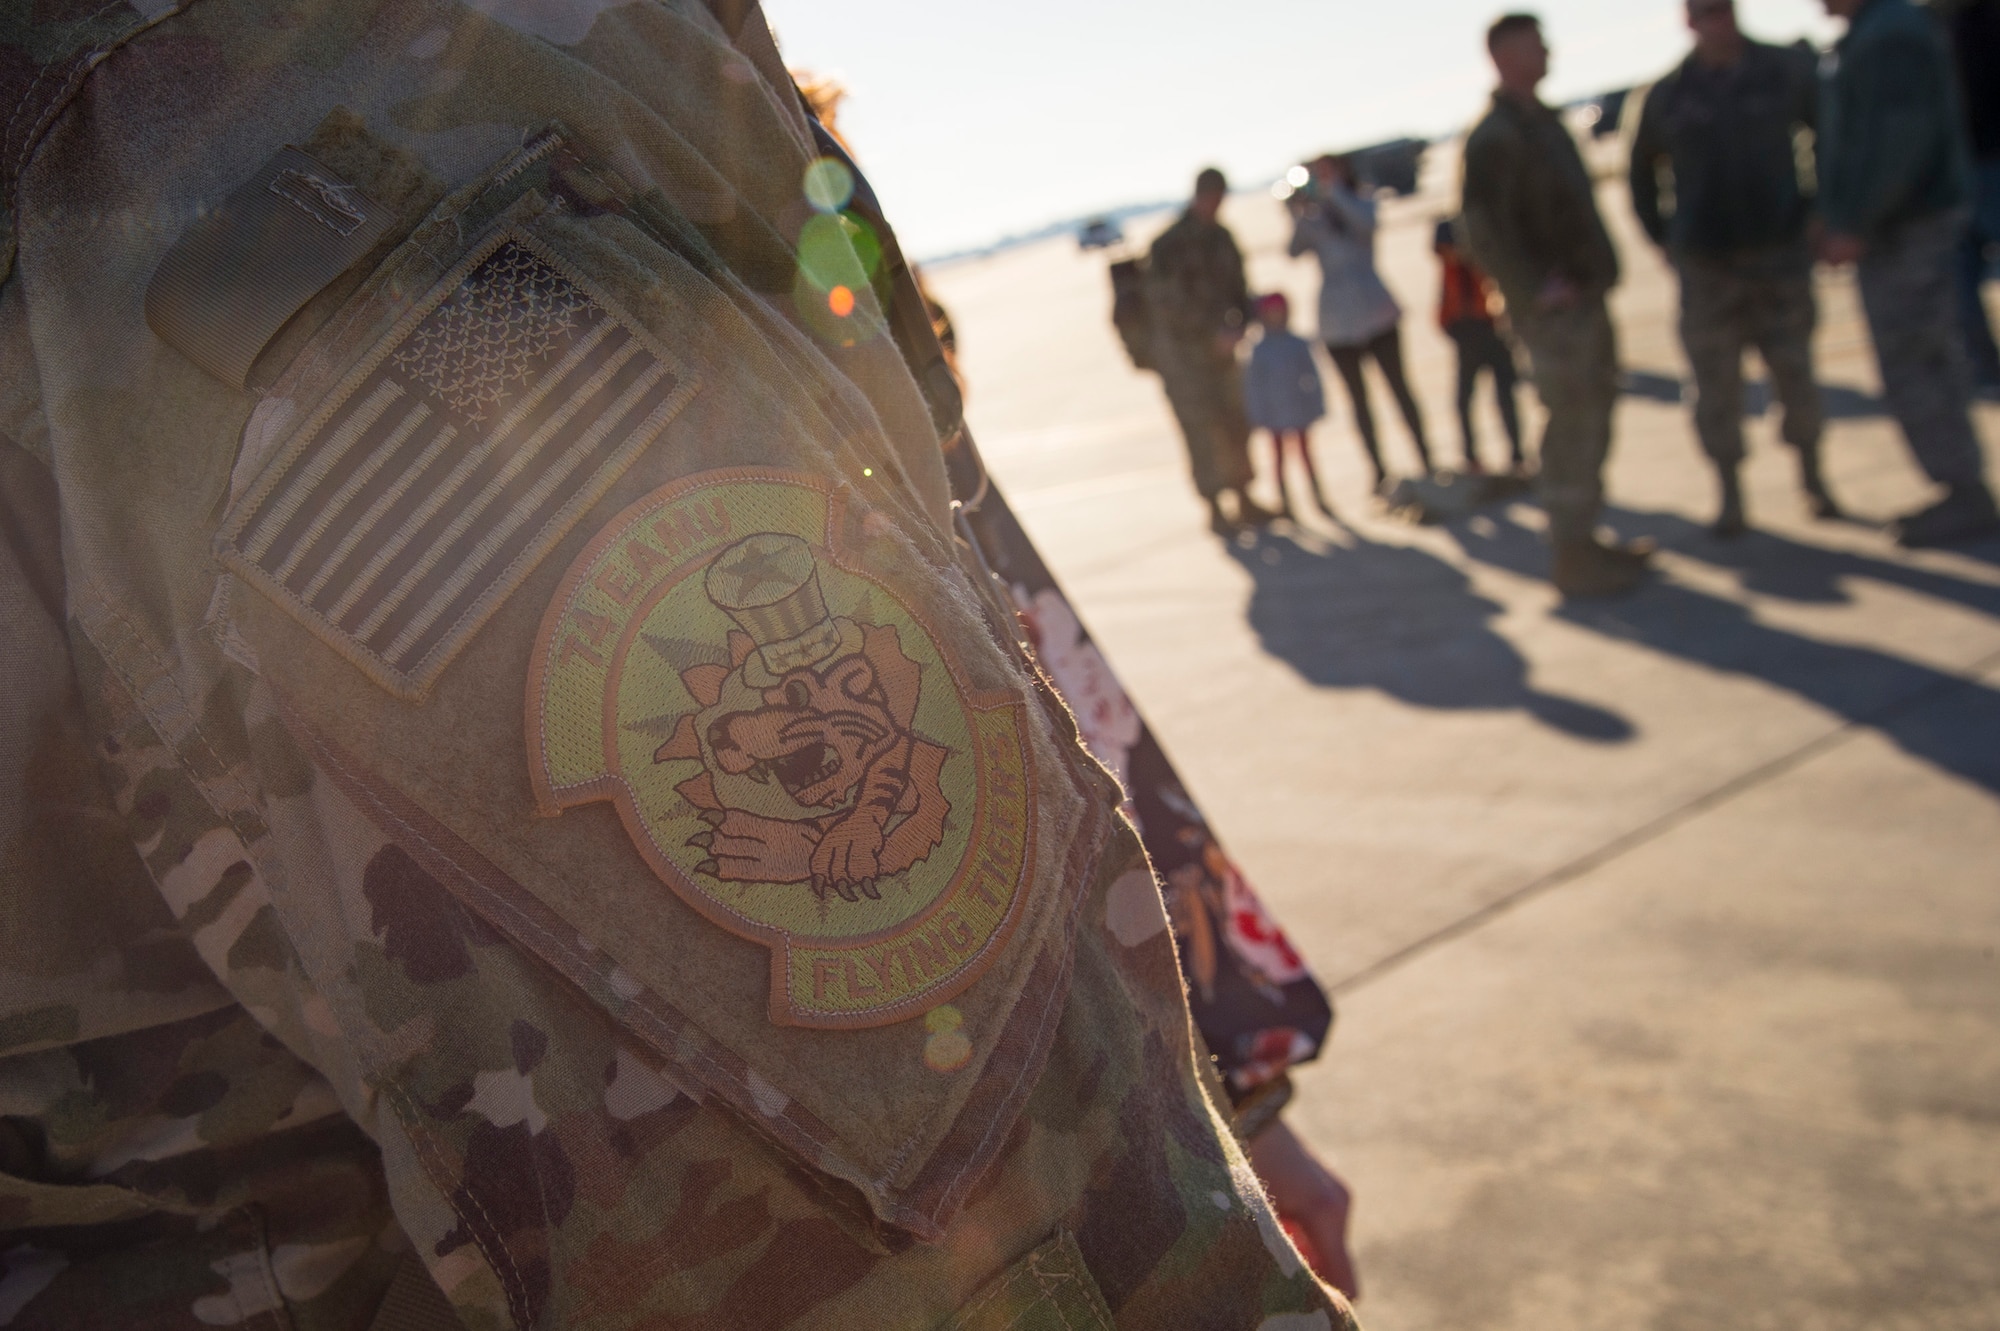 A 74th Expeditionary Aircraft Maintenance Unit patch rests on the arm of a returning maintainer during a redeployment ceremony for the 74th Fighter Squadron, Jan. 19, 2018, at Moody Air Force Base, Ga. The 74th FS conducted around-the-clock planning and operations, which have decimated ISIS’ fighting capacity with precise strikes, erasing tens of thousands of fighters from ISIS rosters. (U.S. Air Force photo by Andrea Jenkins)